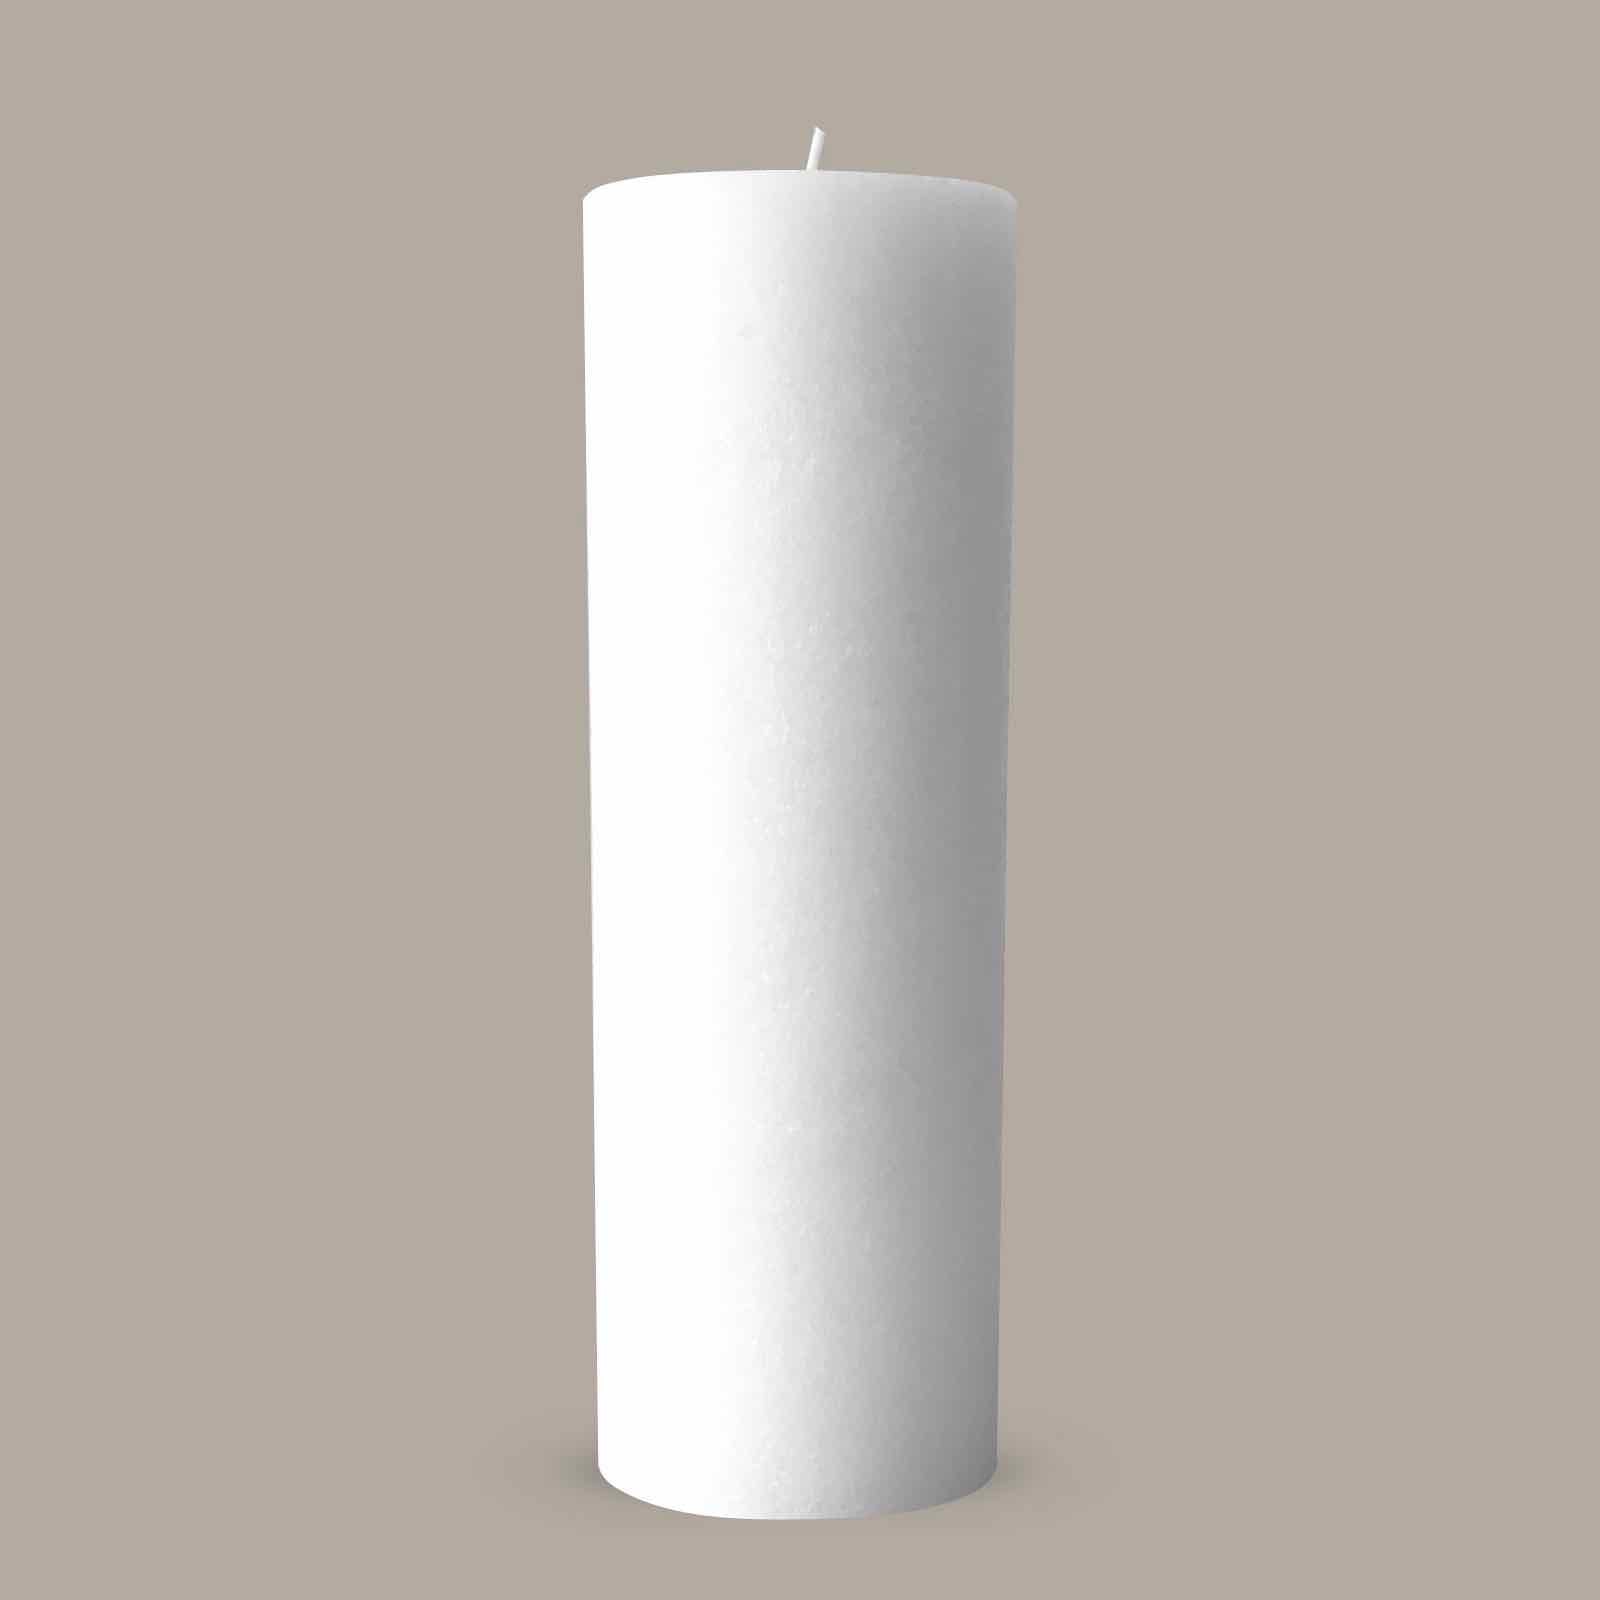 Extra large textured white pillar candle